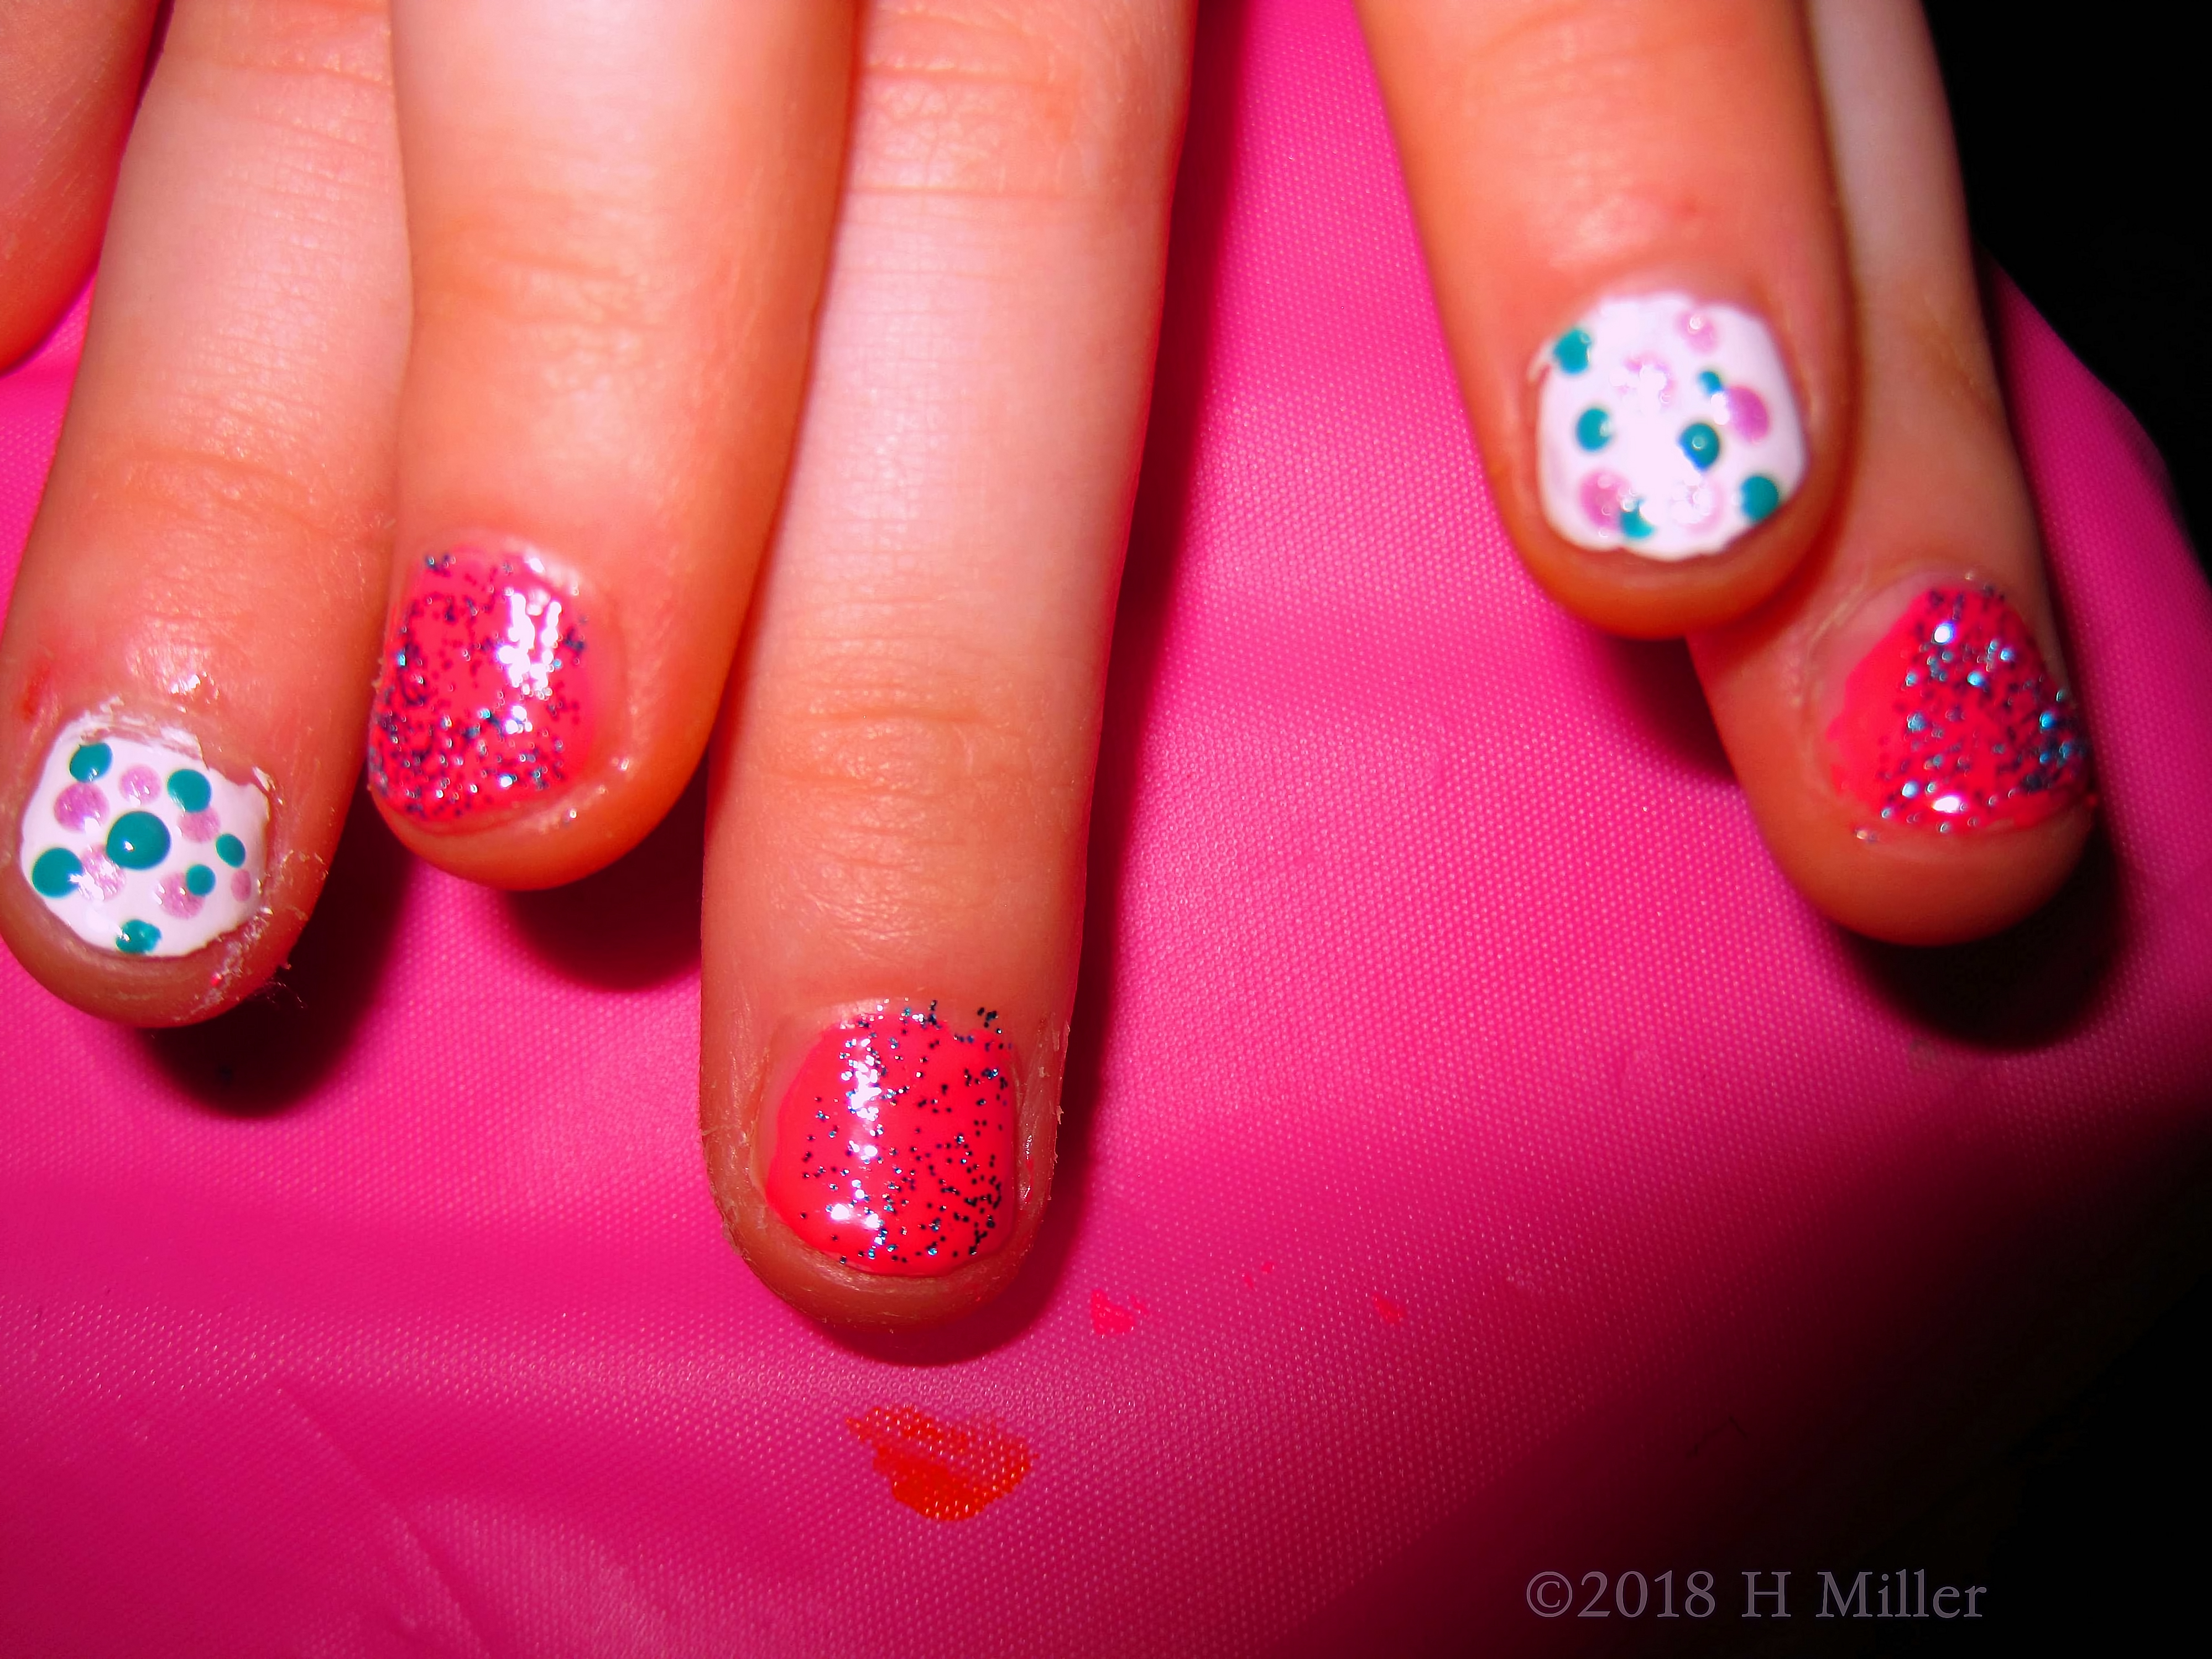 Five Nails In Kids Manicure Closeup With Polka Dot Kids Nail Art! 4